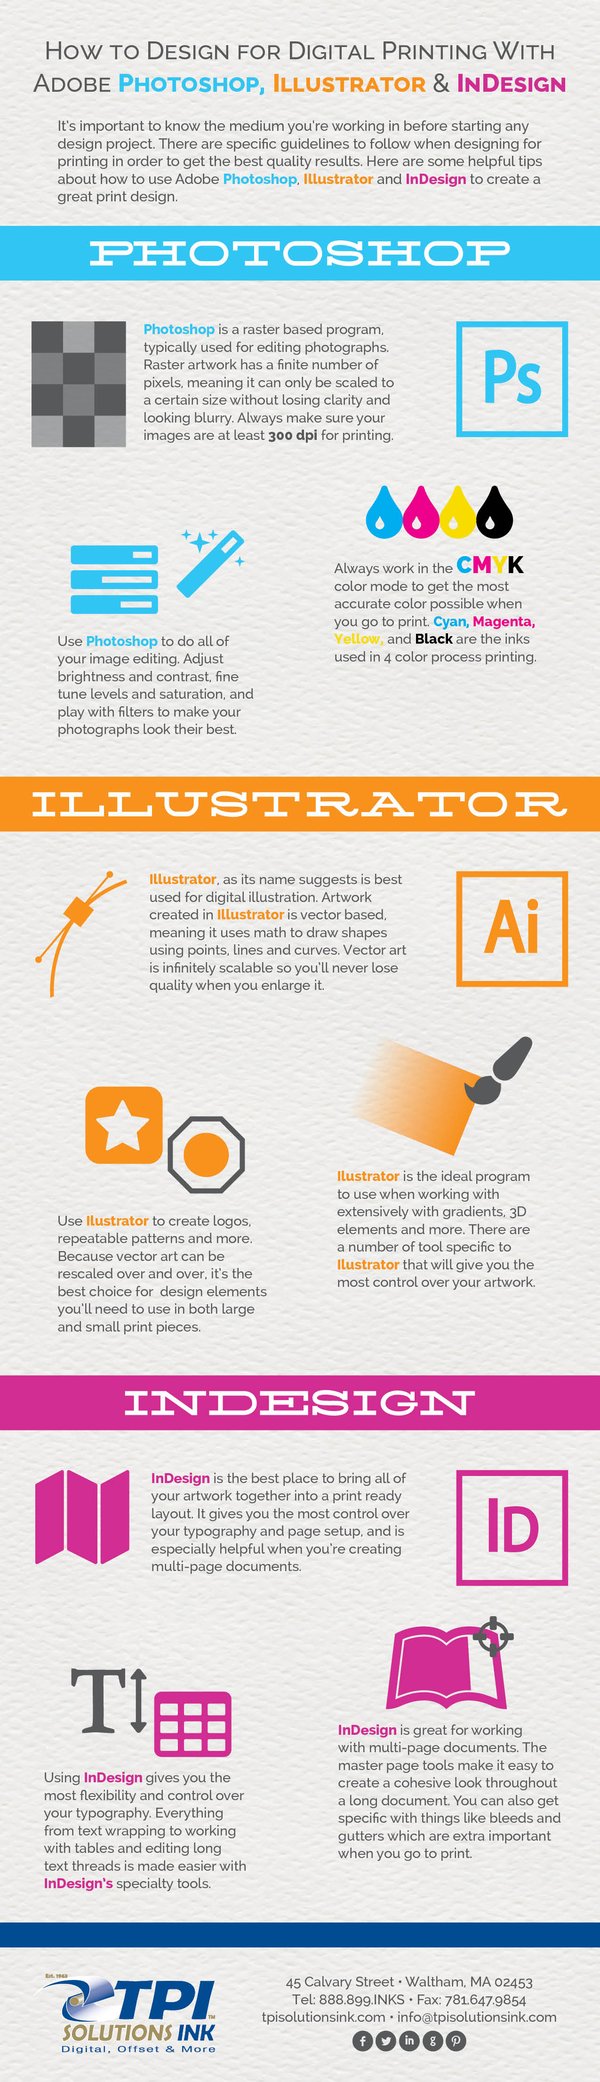 Design for Print with PhotoShop Illustrator and InDesign. #Infographic by TPI Solutions Ink